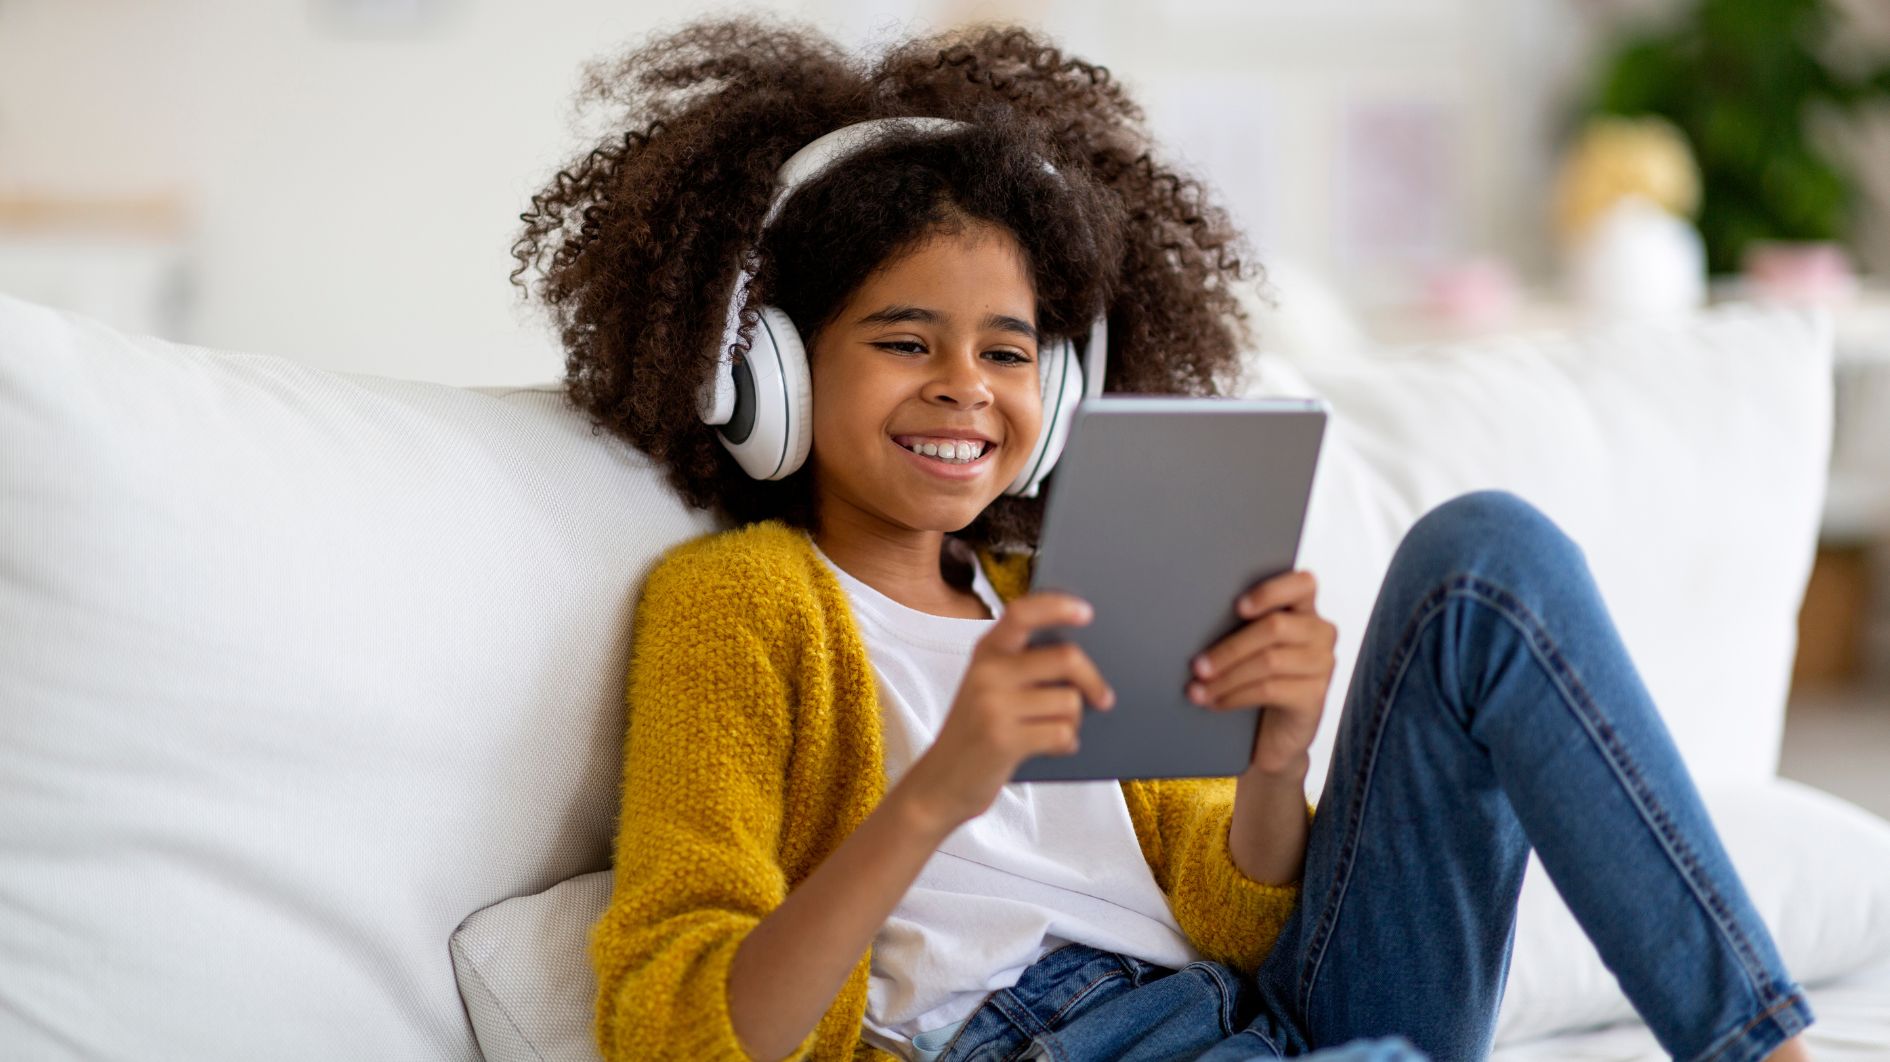 Child wearing headphones sat on a sofa using a tablet